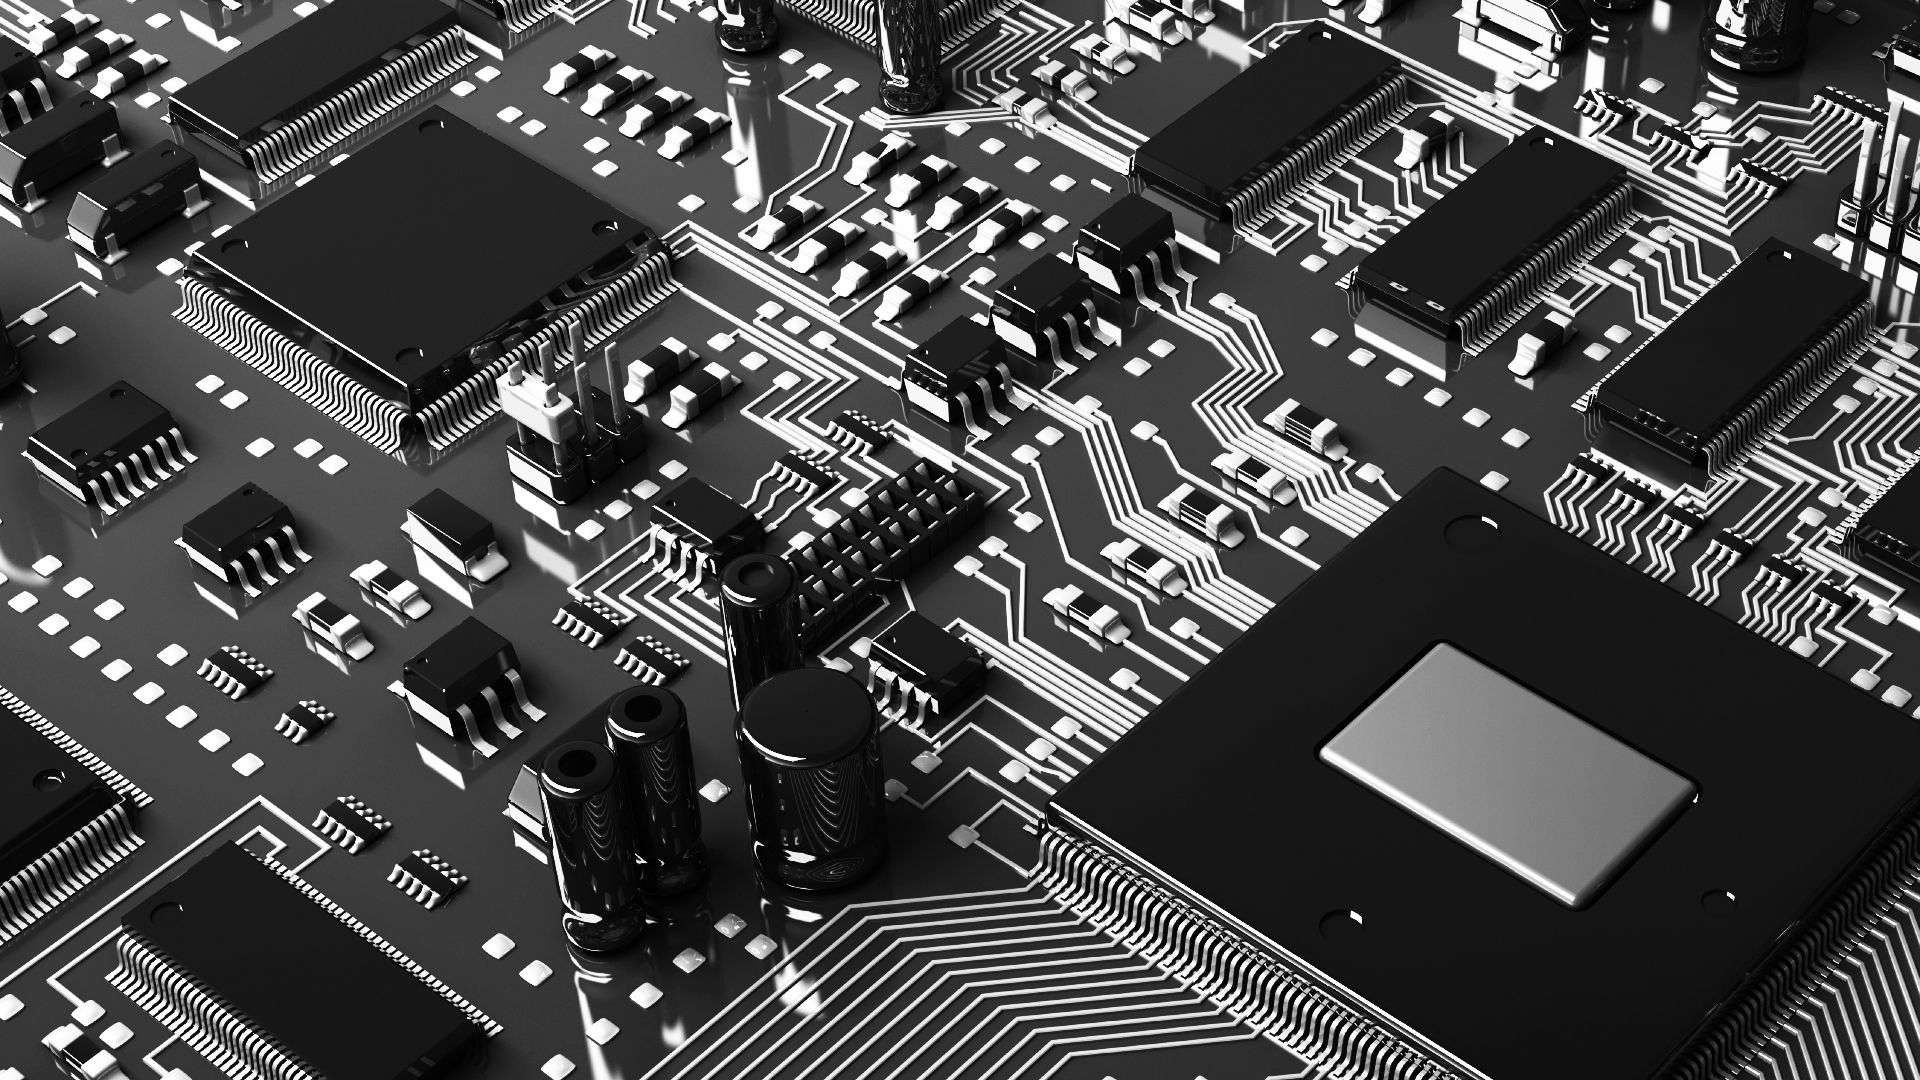 MM_2898] Motherboards Circuits 3D Circuit Board 1920X1080 Wallpapers Download Schematic Wiring